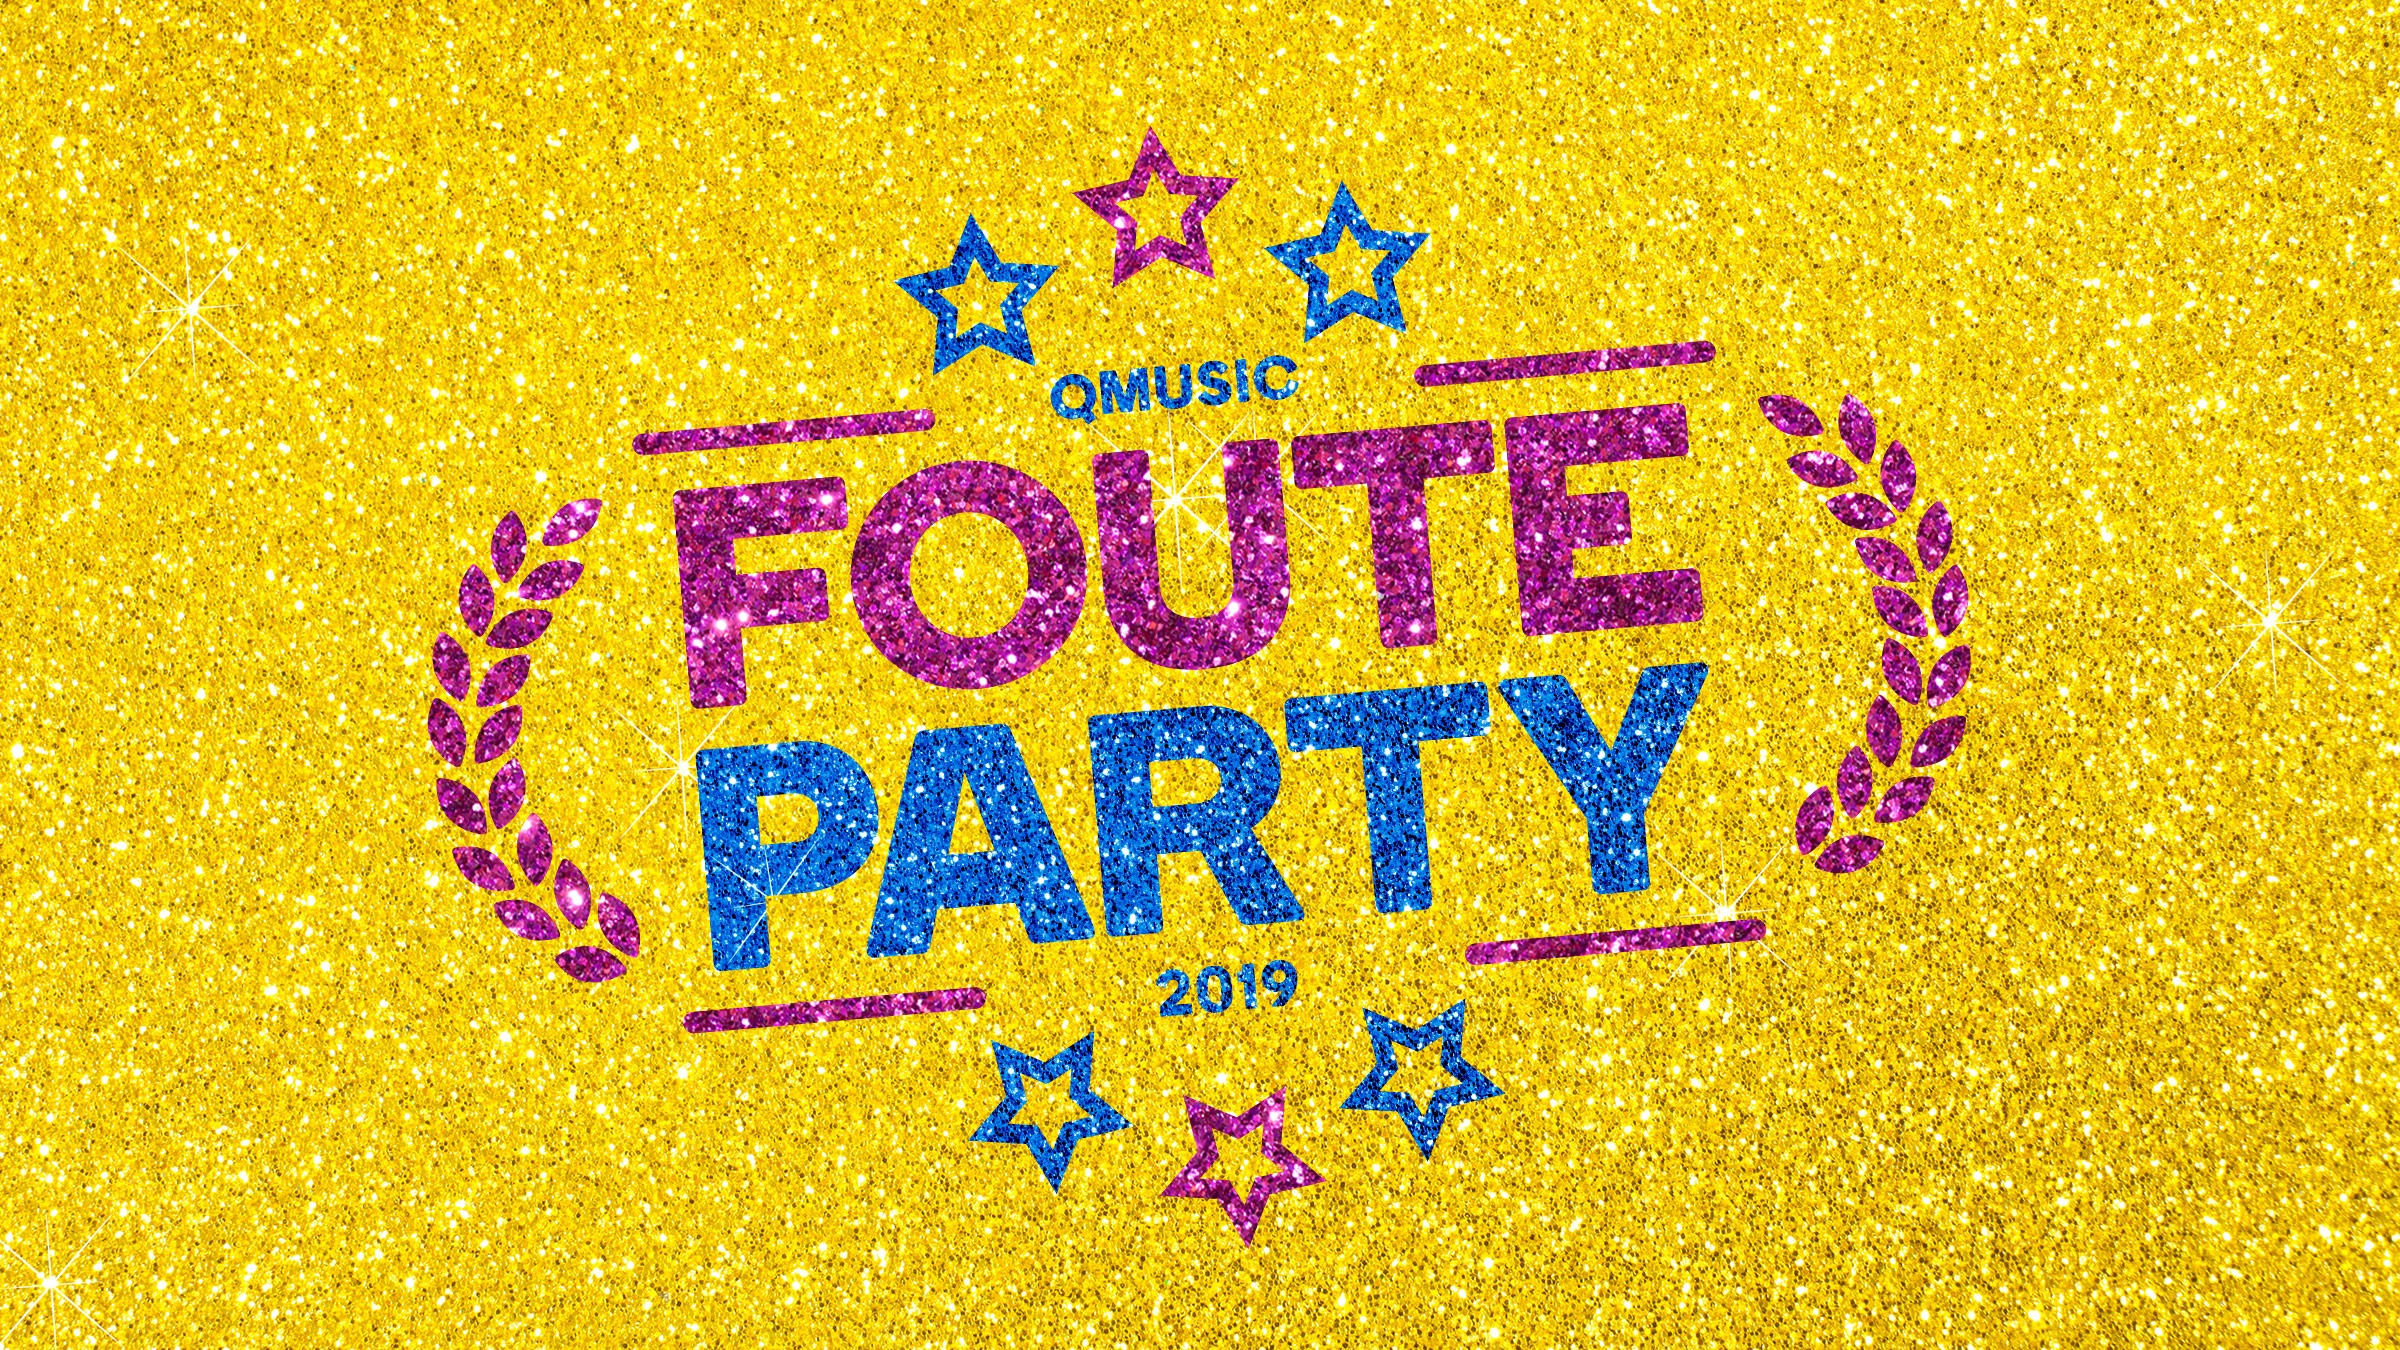 Qmusic teaser fouteparty2019 sales